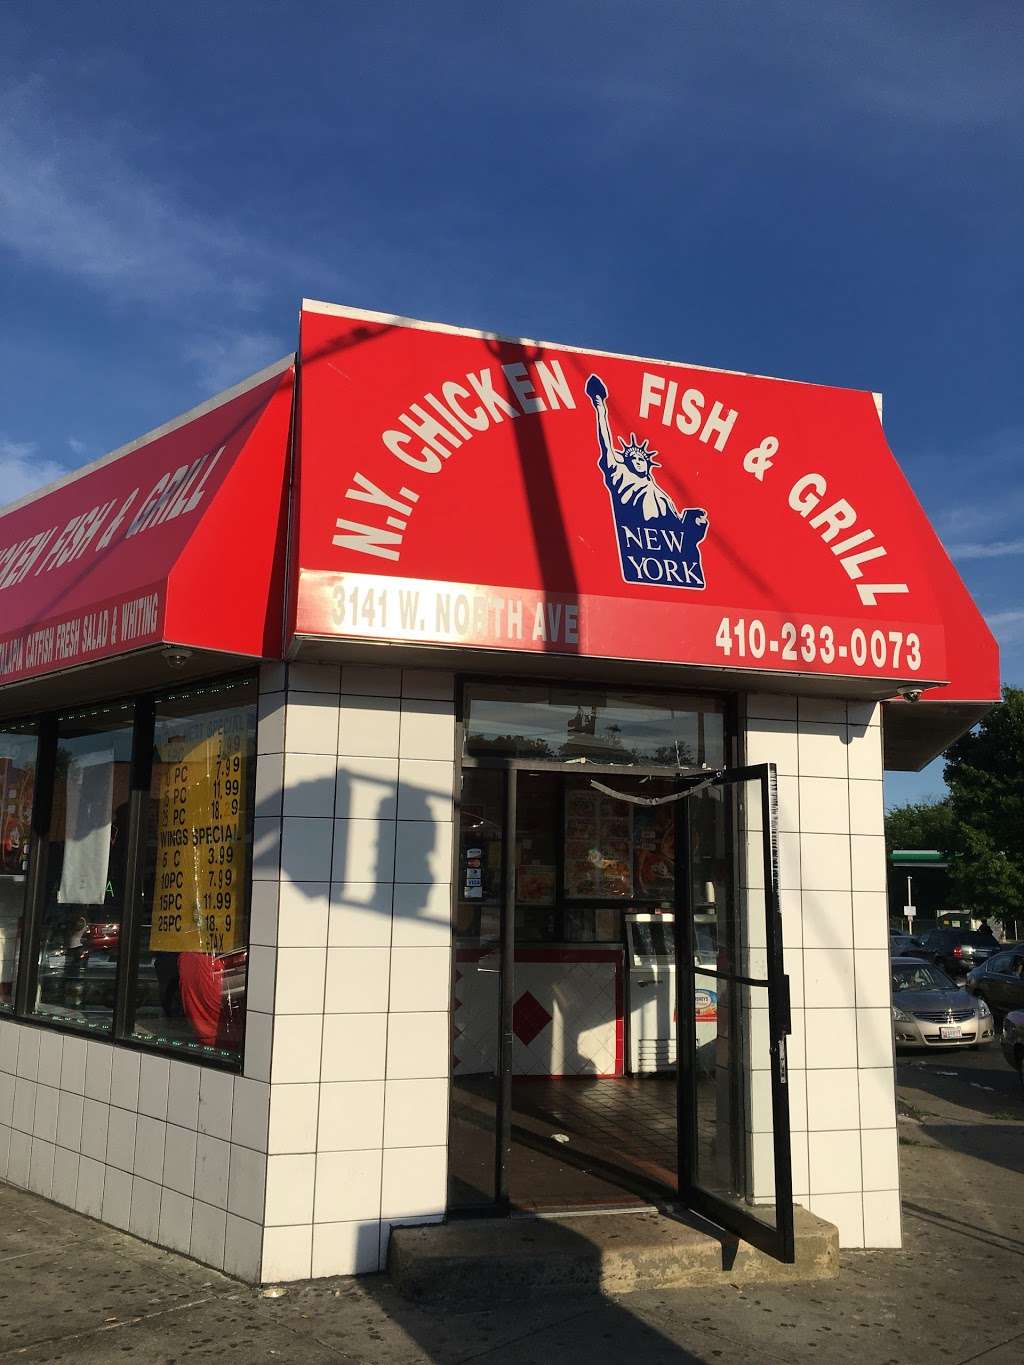 New York Fried Chicken | 3141 W North Ave, Baltimore, MD 21216, USA | Phone: (410) 233-0073